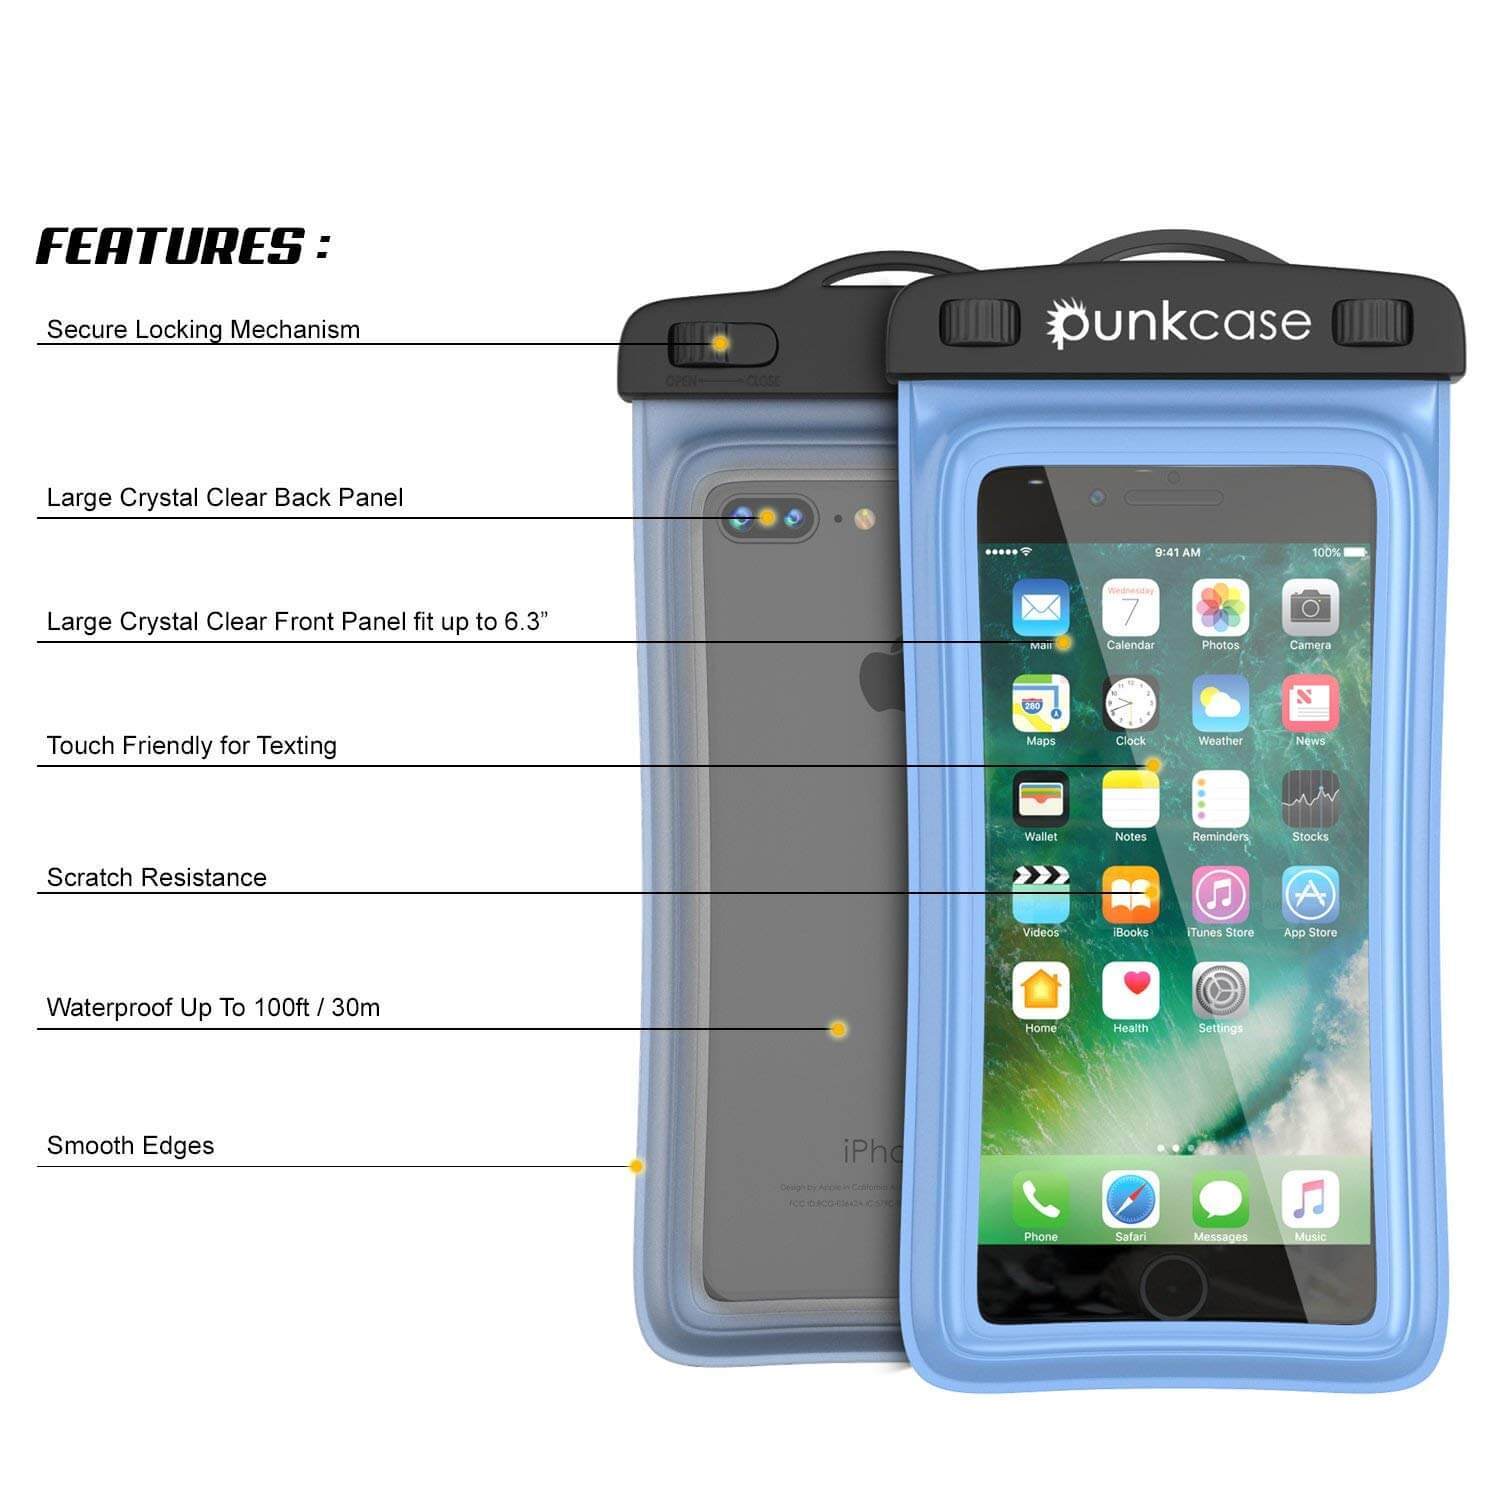 Waterproof Phone Pouch, PunkBag Universal Floating Dry Case Bag for most Cell Phones [Blue]